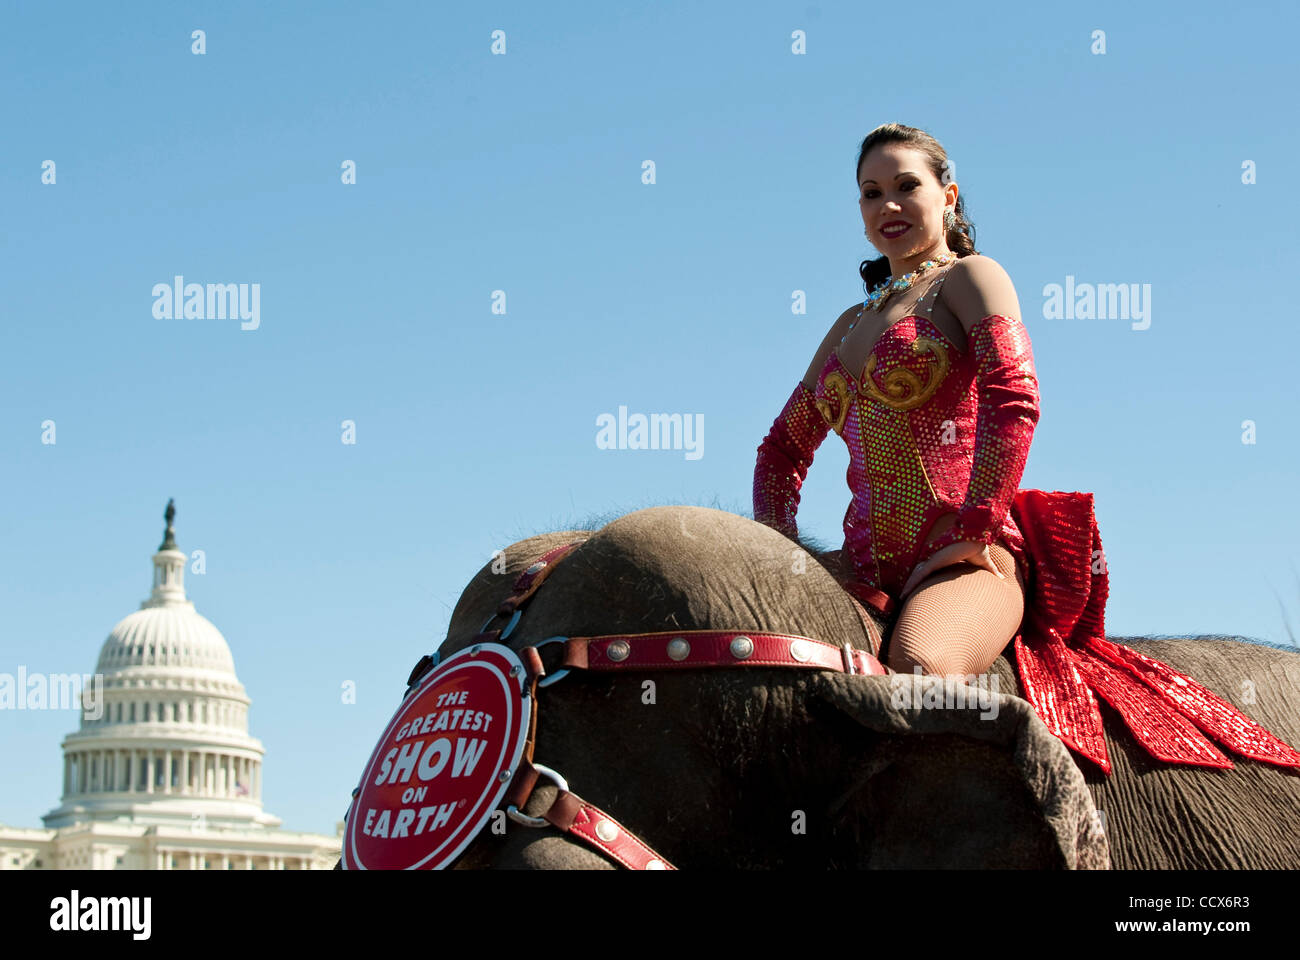 Mar 16,2010 - Washington, District of Columbia USA -  The arrival of the Barnum and Bailey Circus in the Nation's Capital was marked by the march of the elephants through the city and in front of the U.S. Capitol on Tuesday. The circus is in Washington, D.C., March 18 - 21, at the Verizon Center and Stock Photo